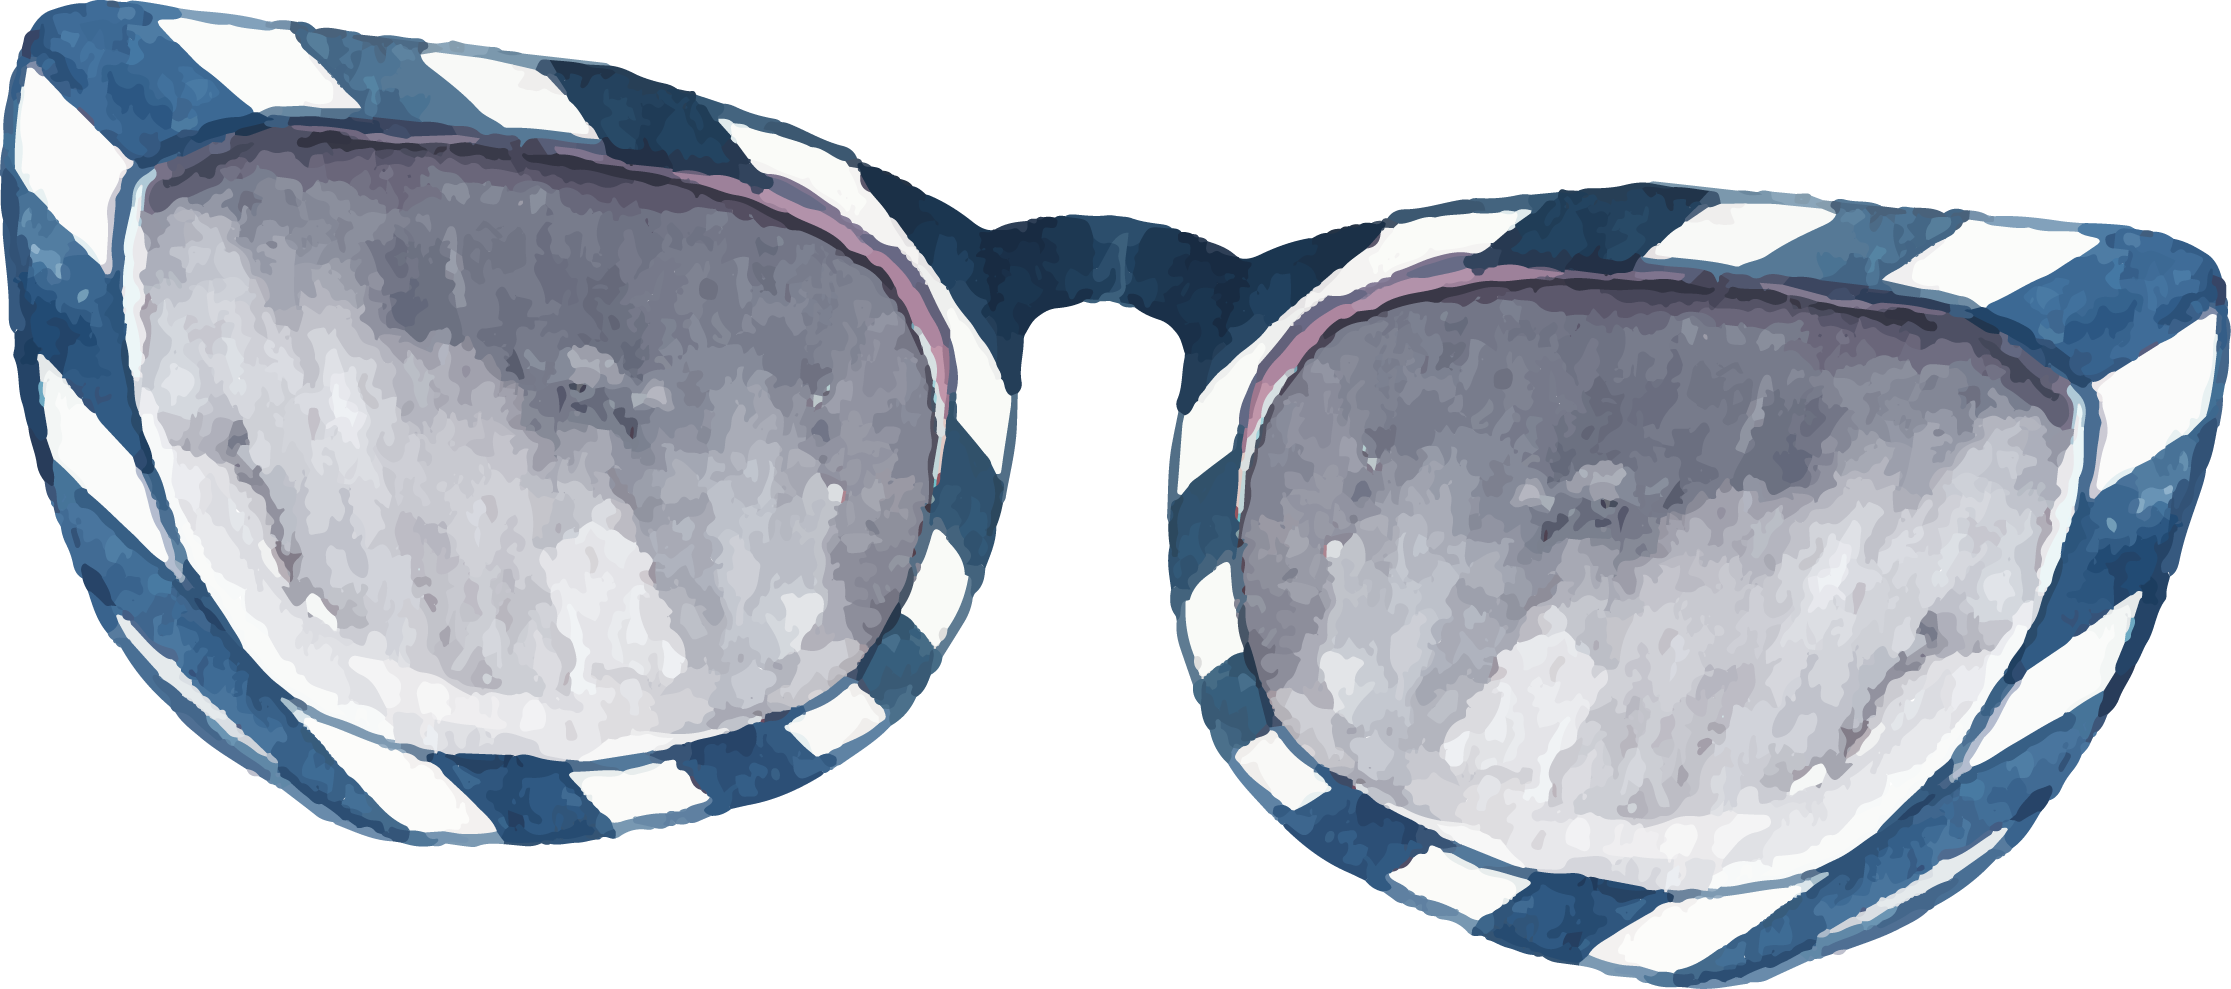 Fashion Sunglasses PNG Image High Quality Clipart